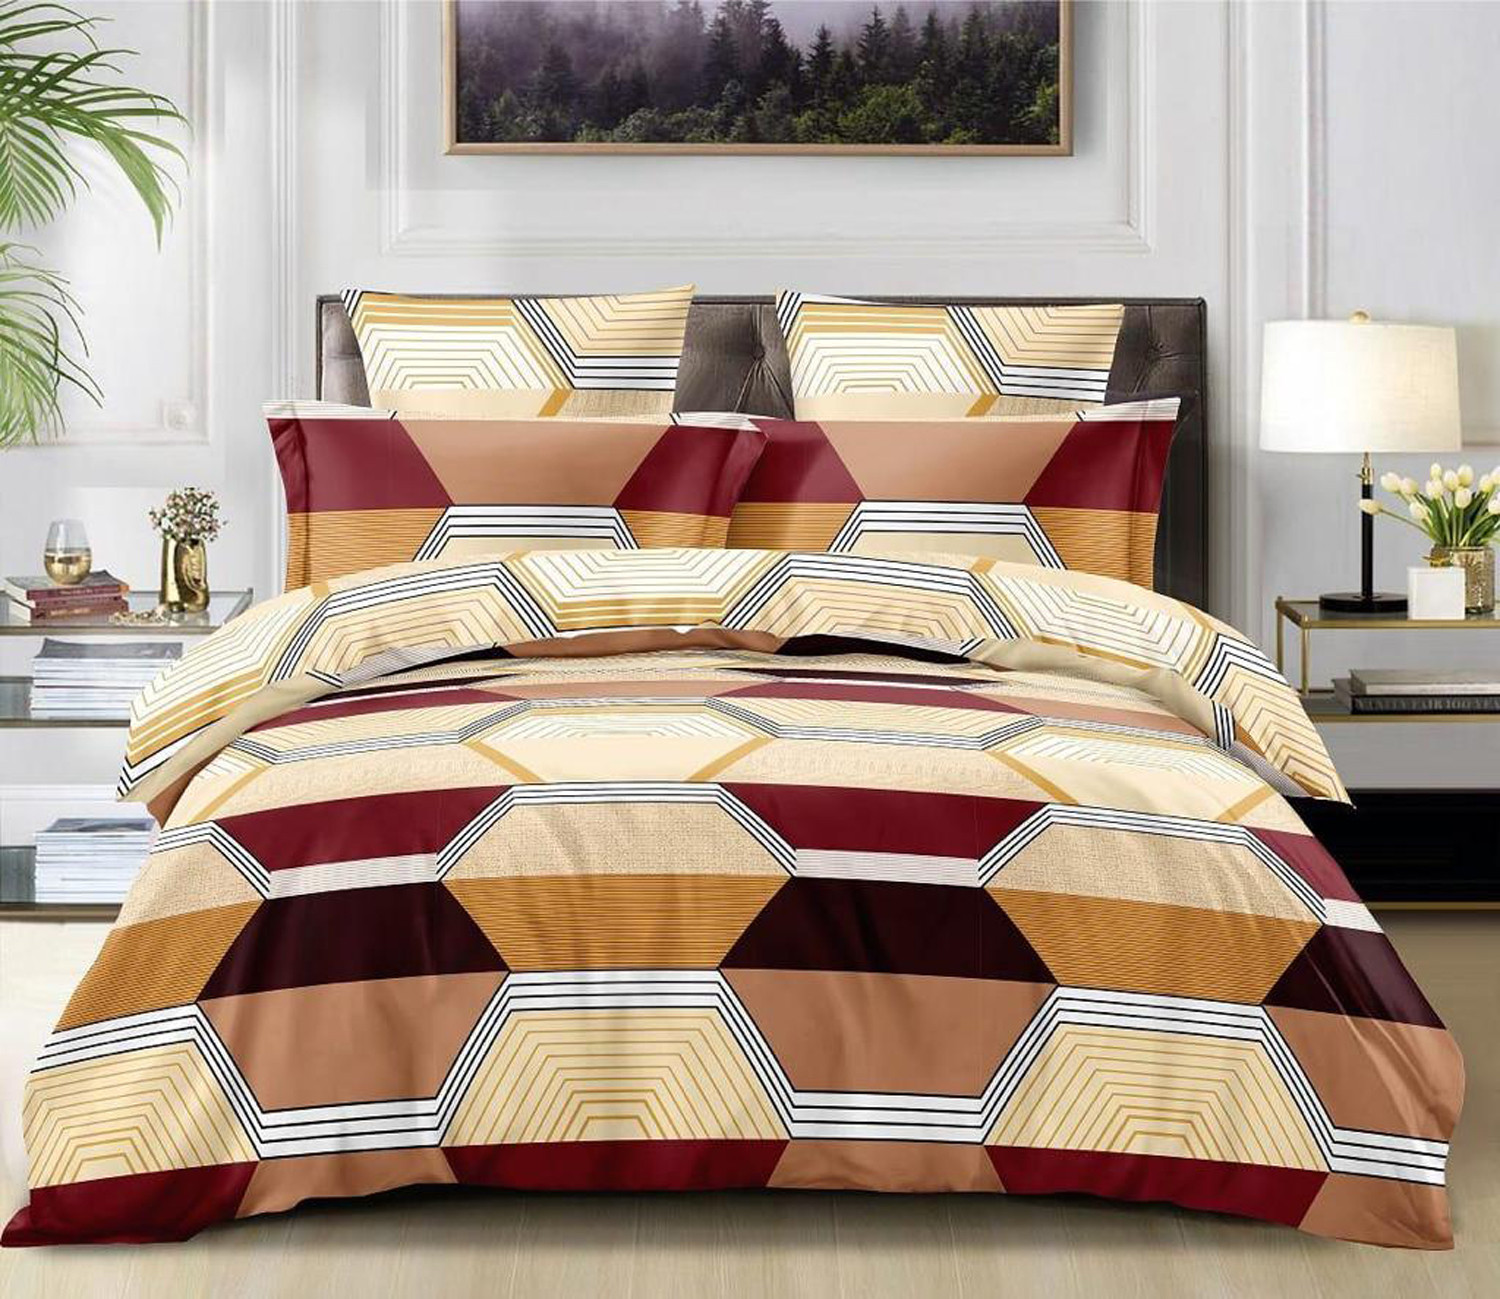 Kuber Industries Geometric Print Glace Cotton AC Comforter King Size Bed Comforter, Double Bed Sheet, 2 Pillow Cover (Cream & Brown, 90x100 Inches)-Set of 4 Pieces